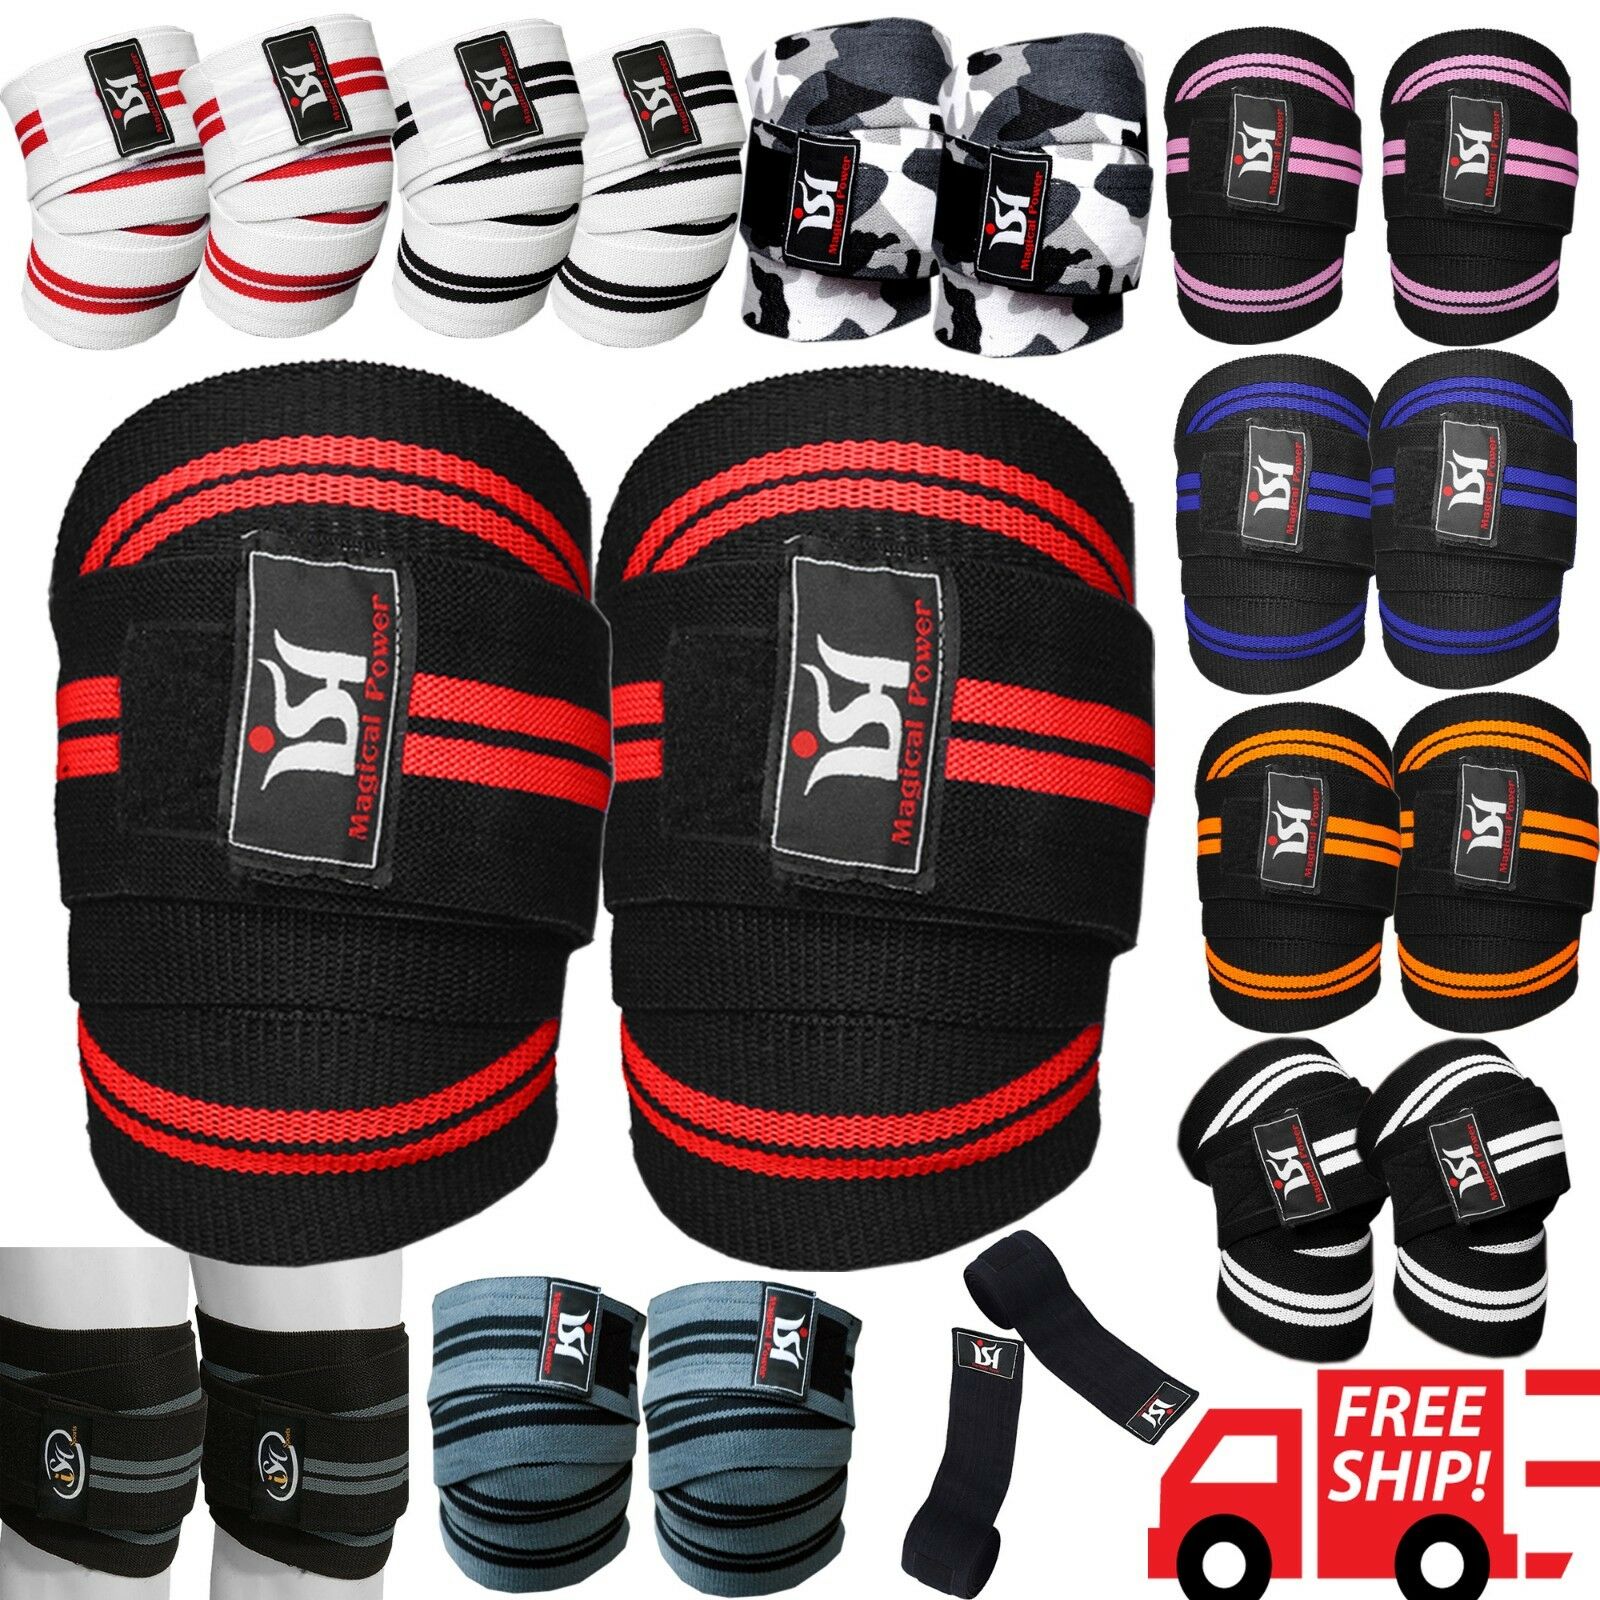 Gym Weight Lifting Knee Wraps Bandage Straps Guard Powerlifting Pads Sleeves